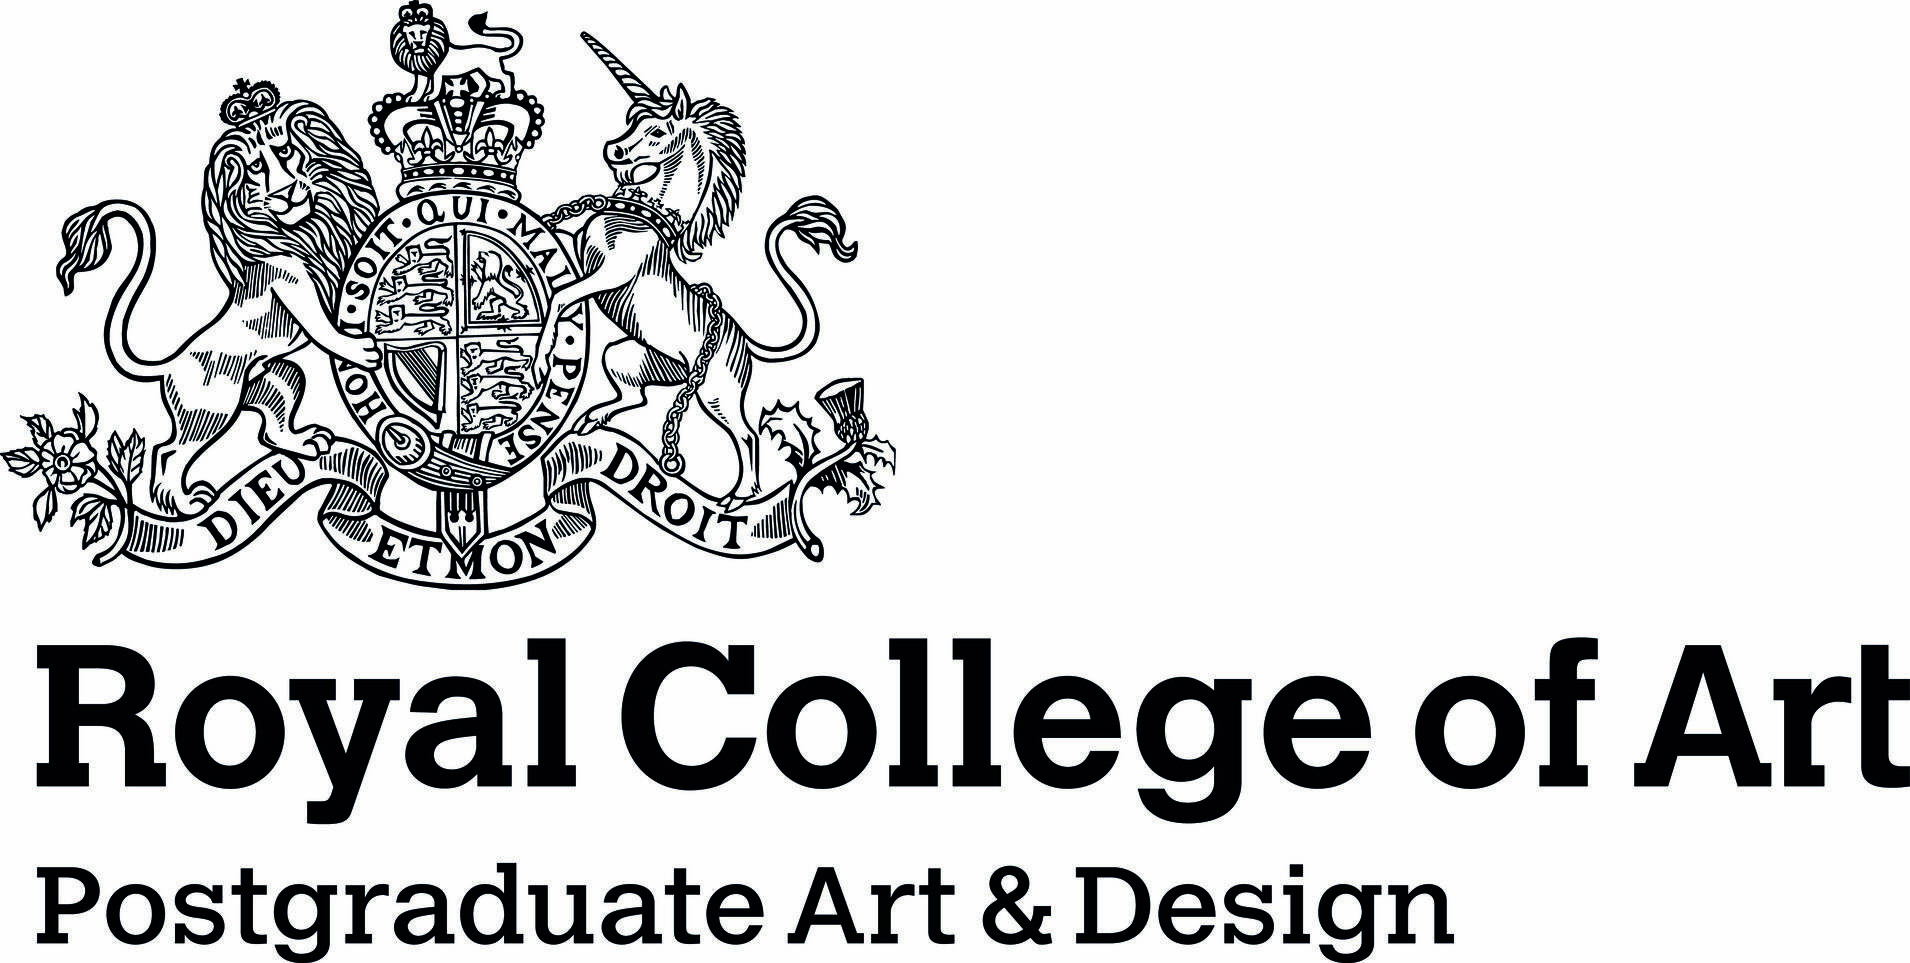 Royal College of Art